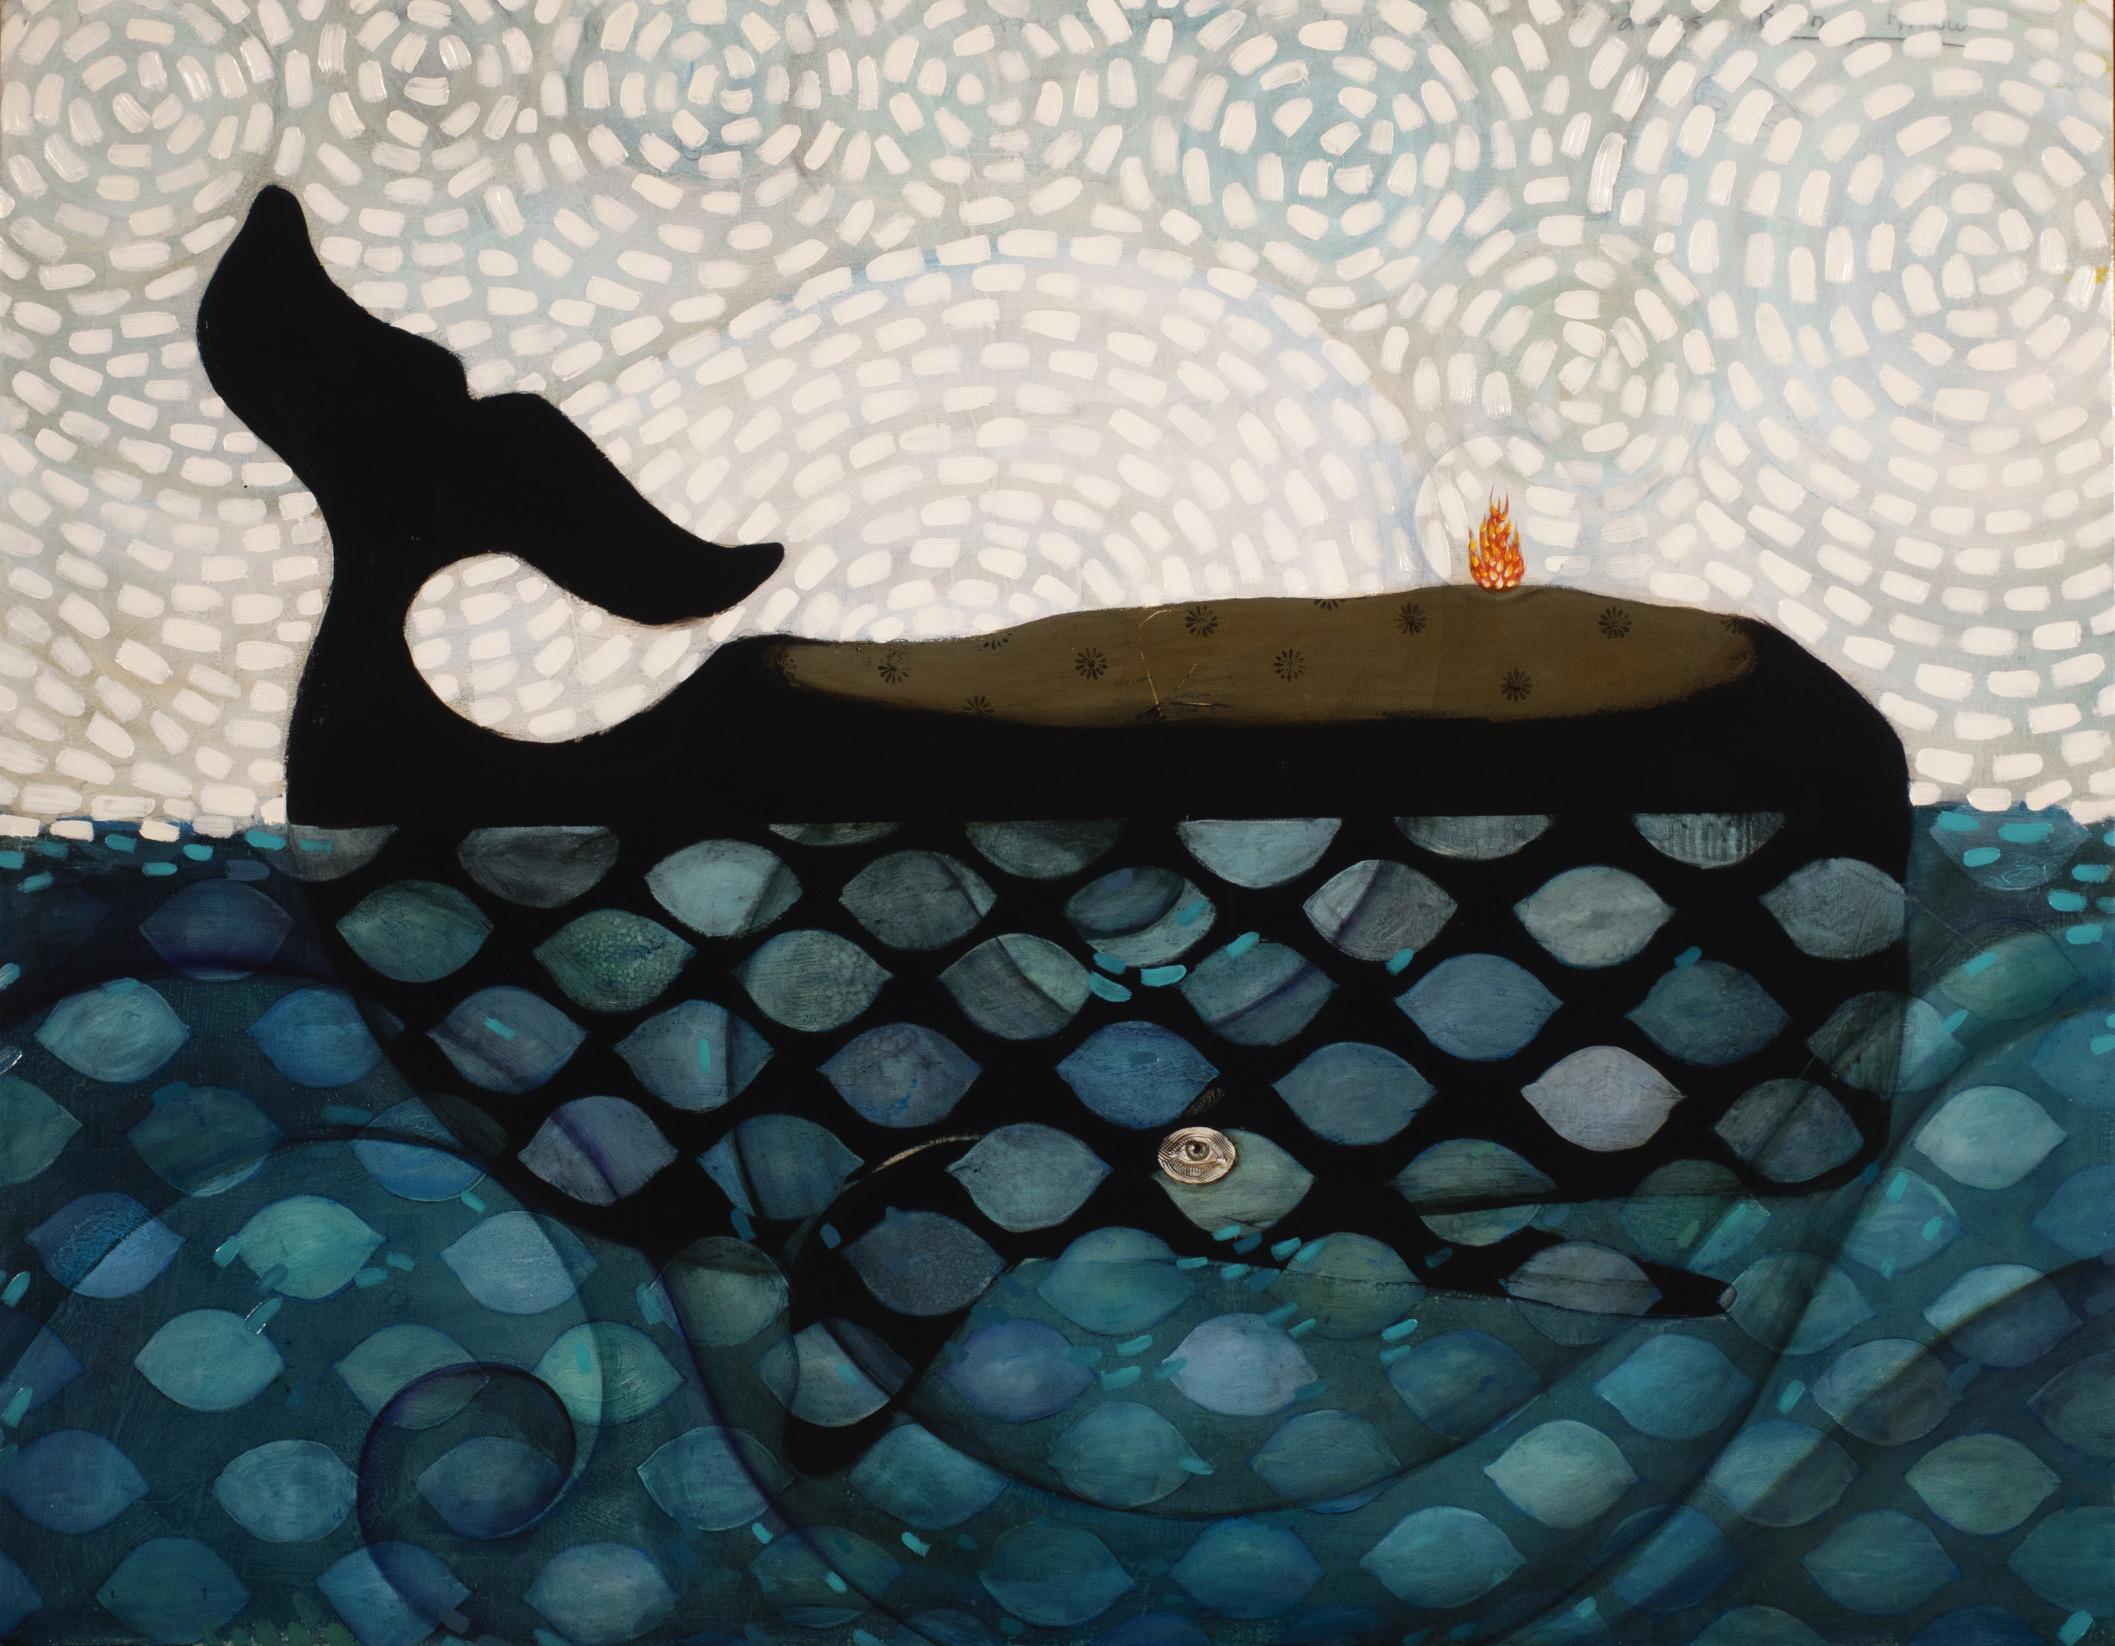 Michele Mikesell Animal Painting - Jasconius the Whale, Large oil painting of a whale, blue color palette & design